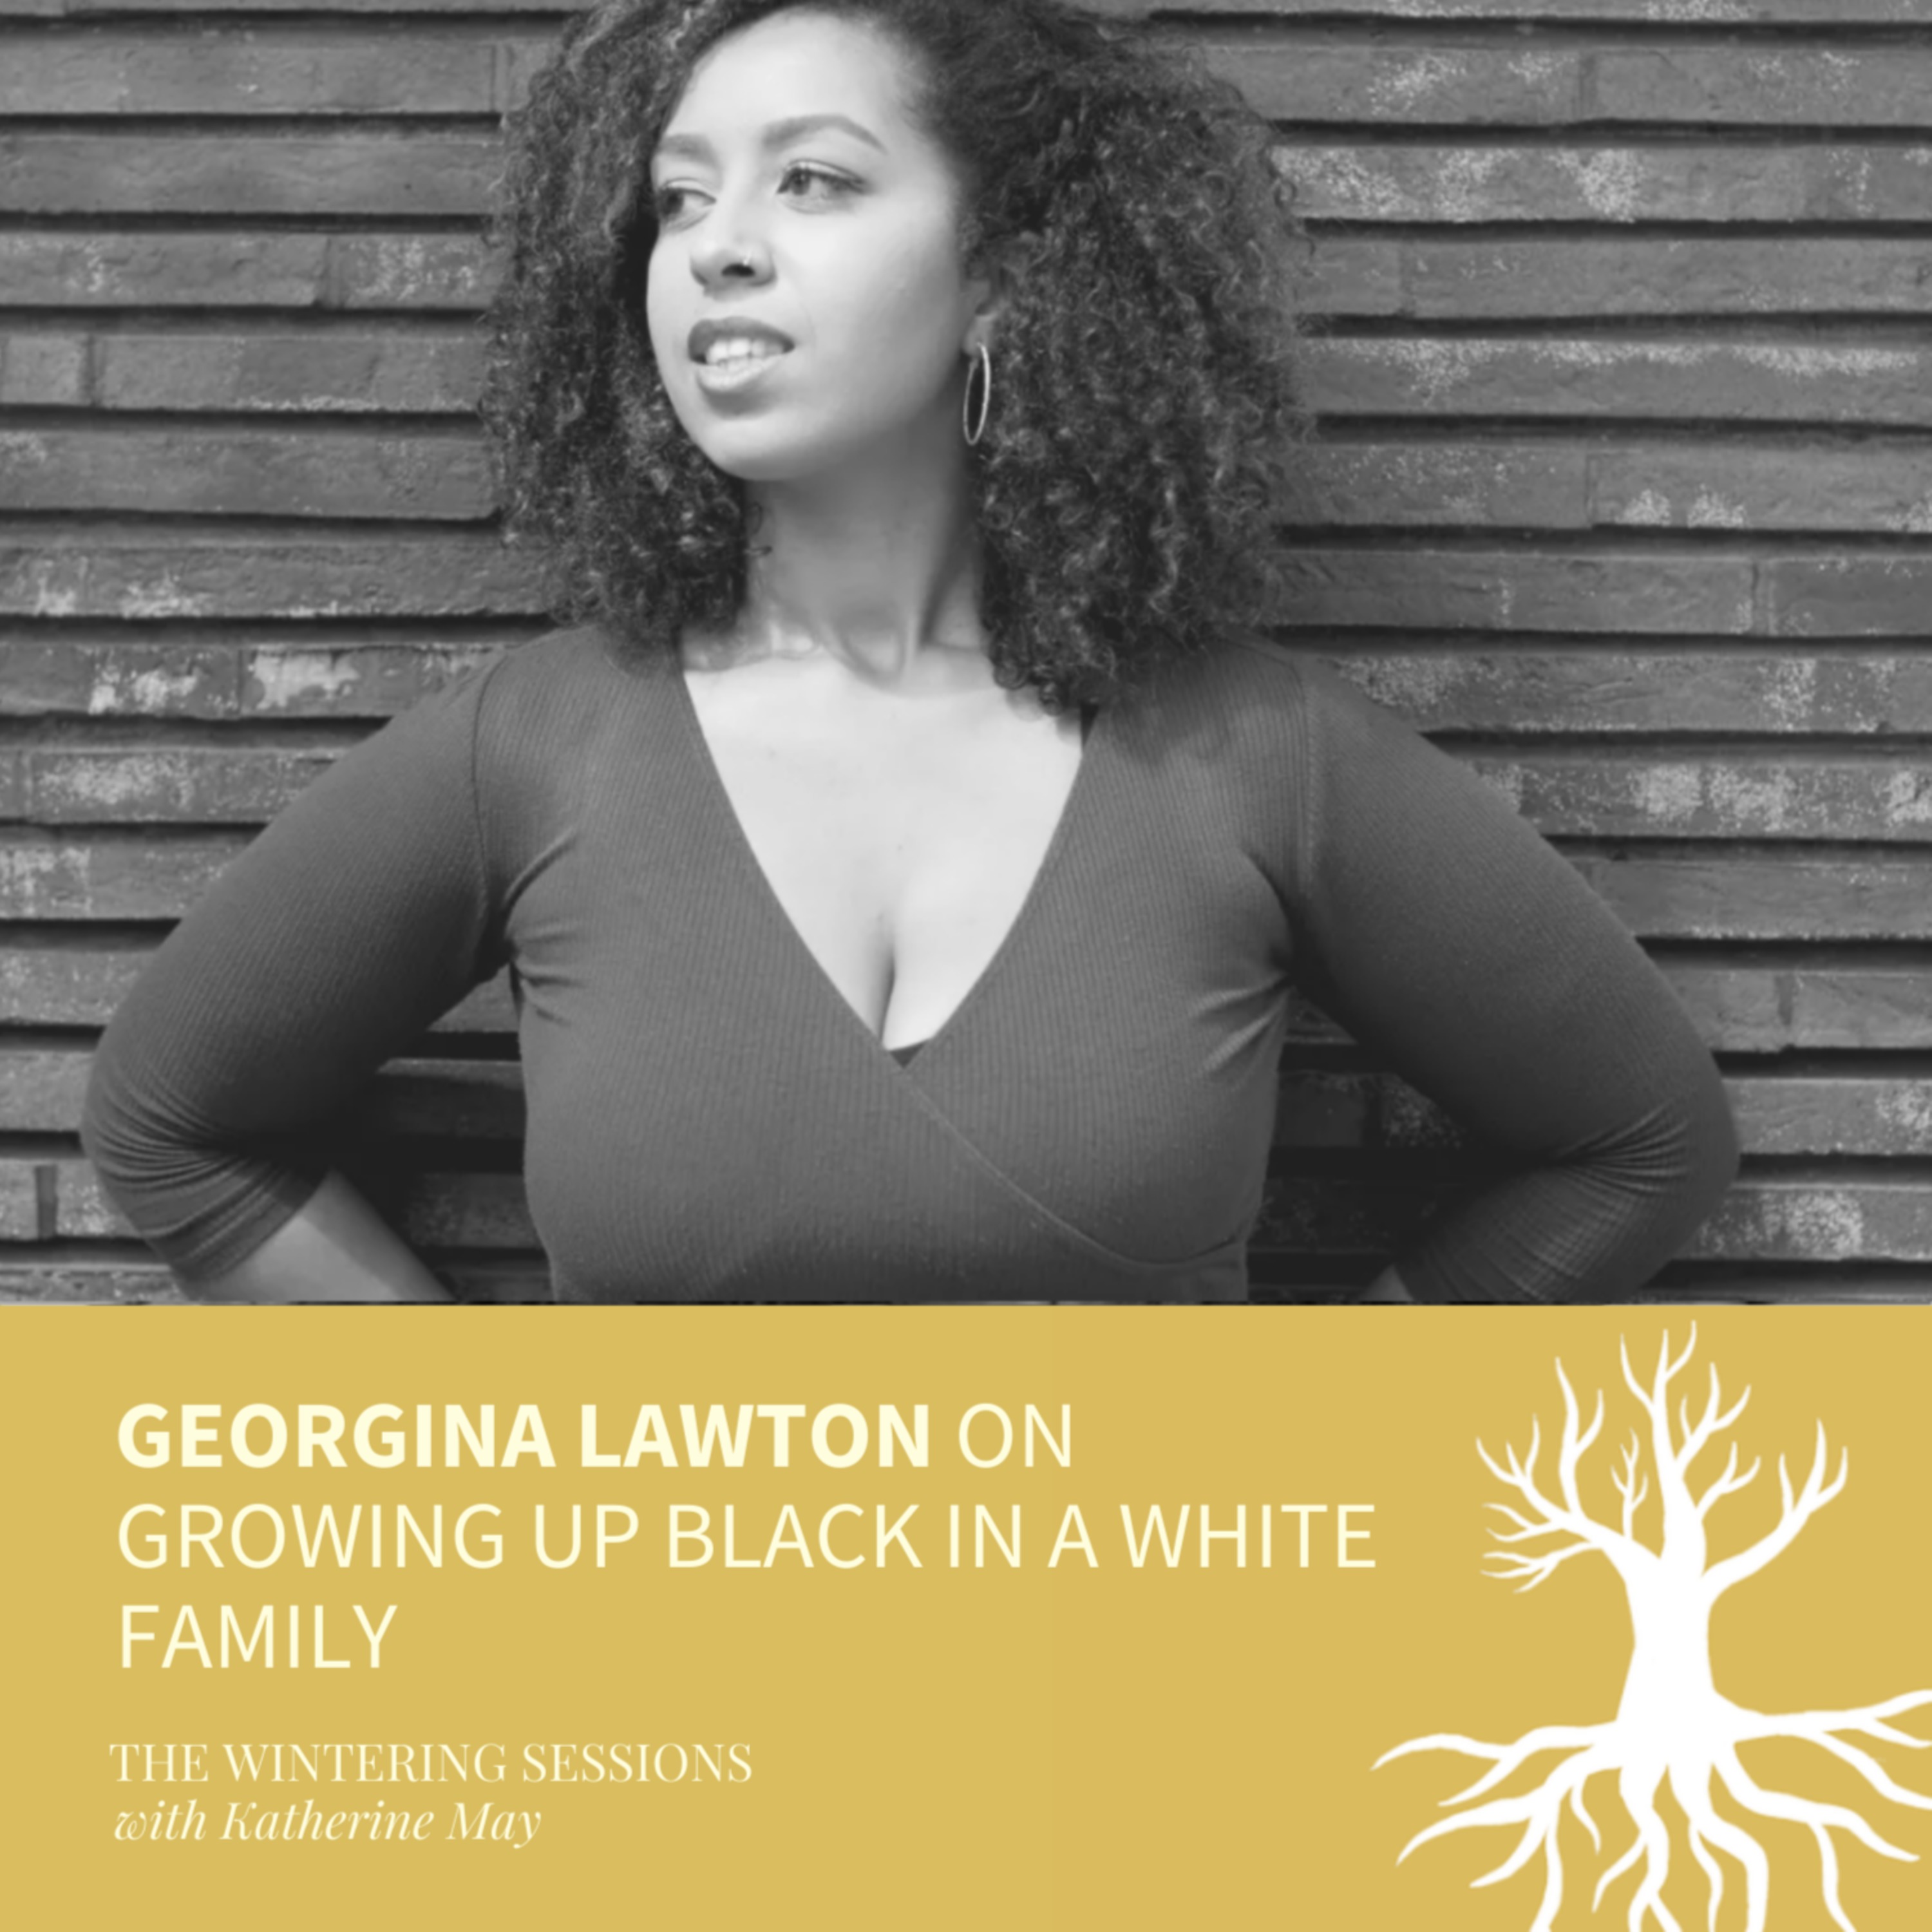 Georgina Lawton on growing up Black in a white family